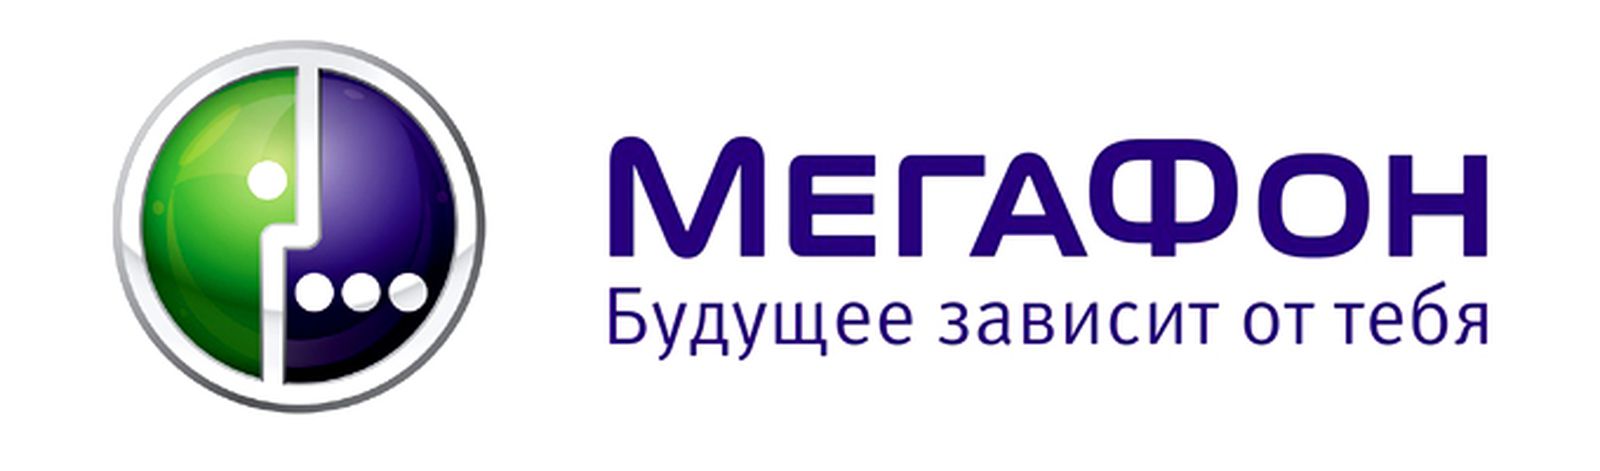 Russia's Megafon Signs Multi-Year iPhone Distribution Deal with Apple -  MacRumors